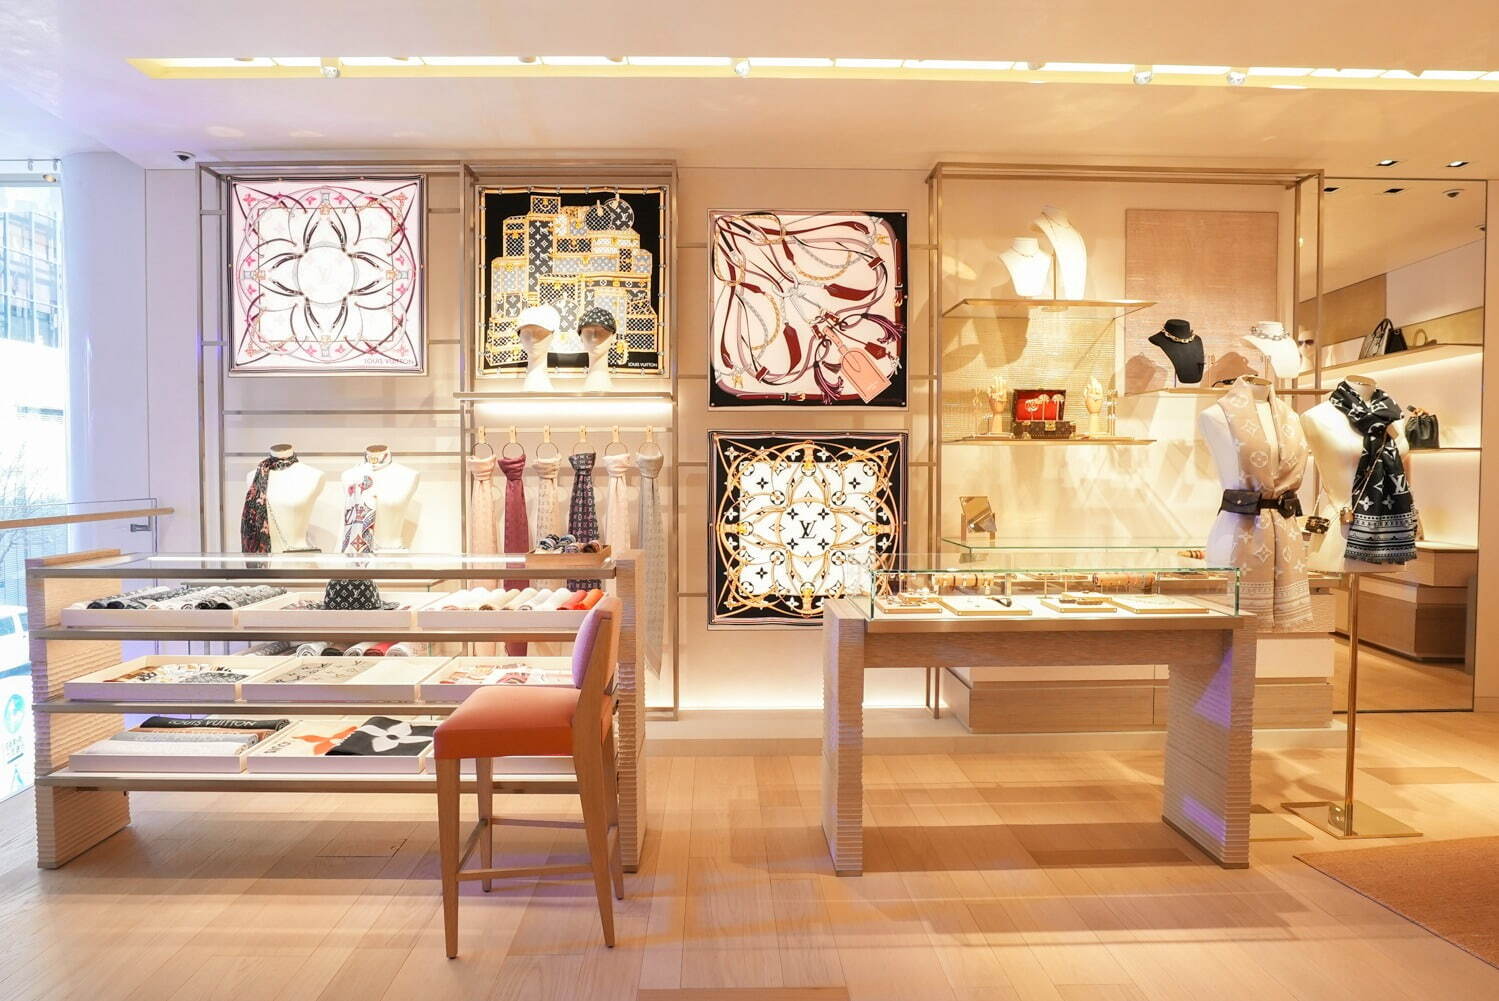 What's inside the Le Cafe V (Louis Vuitton Cafe) here in Ginza